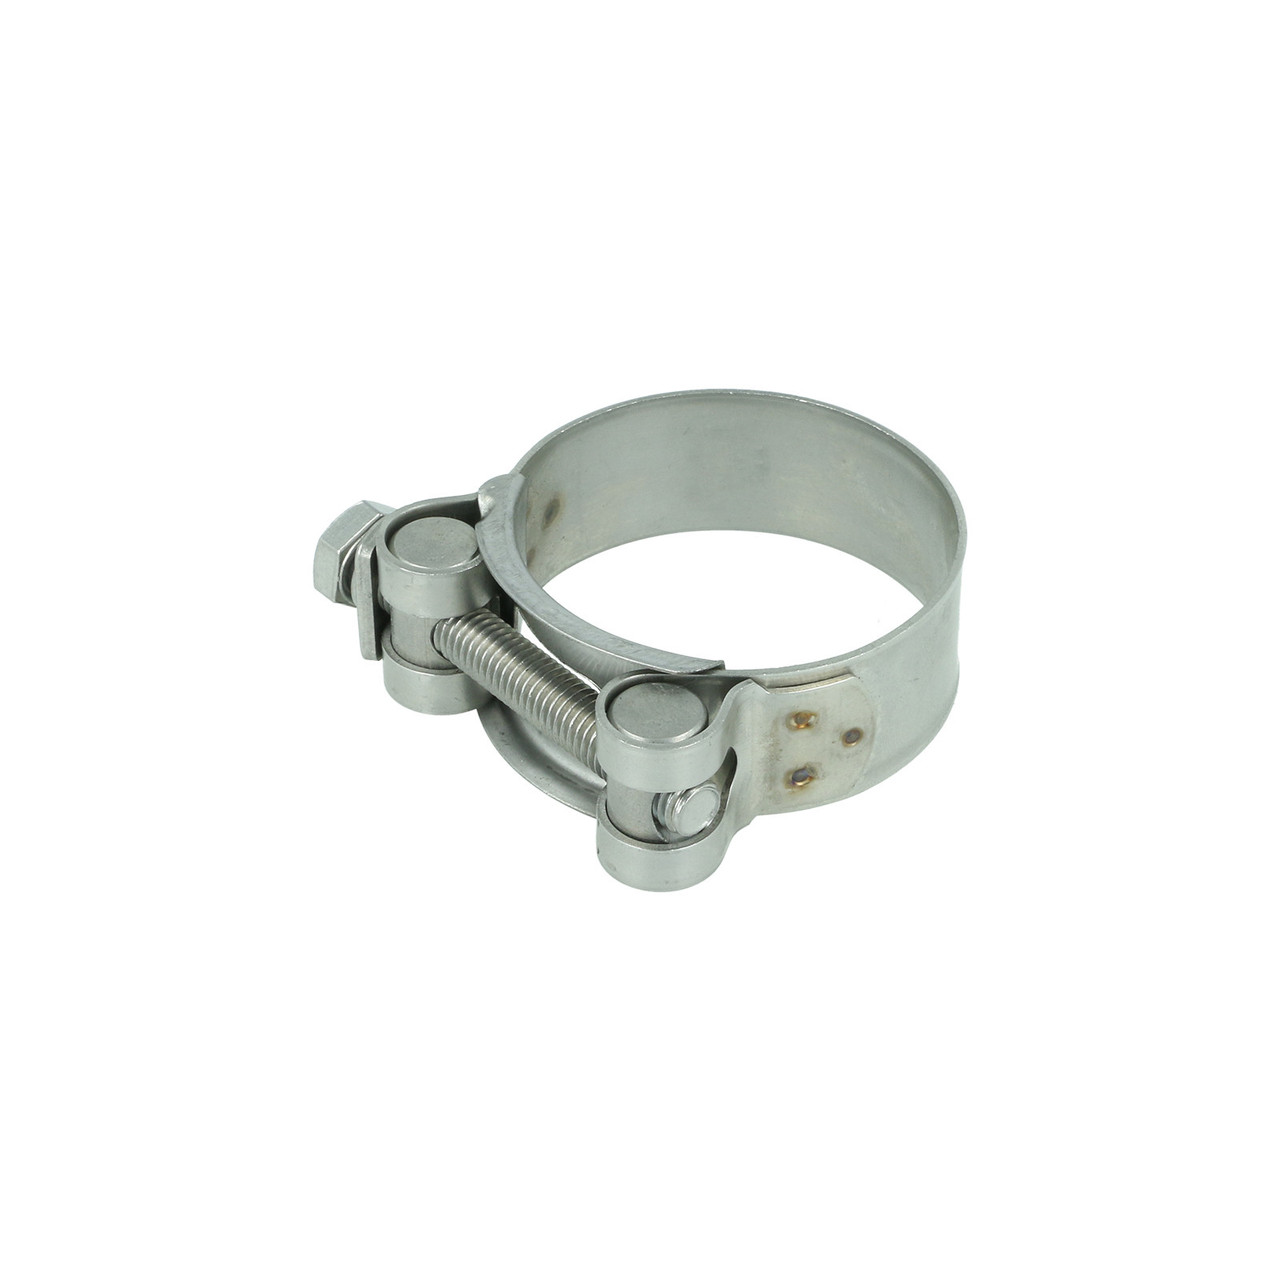 BOOST Products Heavy Duty Clamp - Stainless Steel - 74-79mm (BOP-SC-HD-7479)